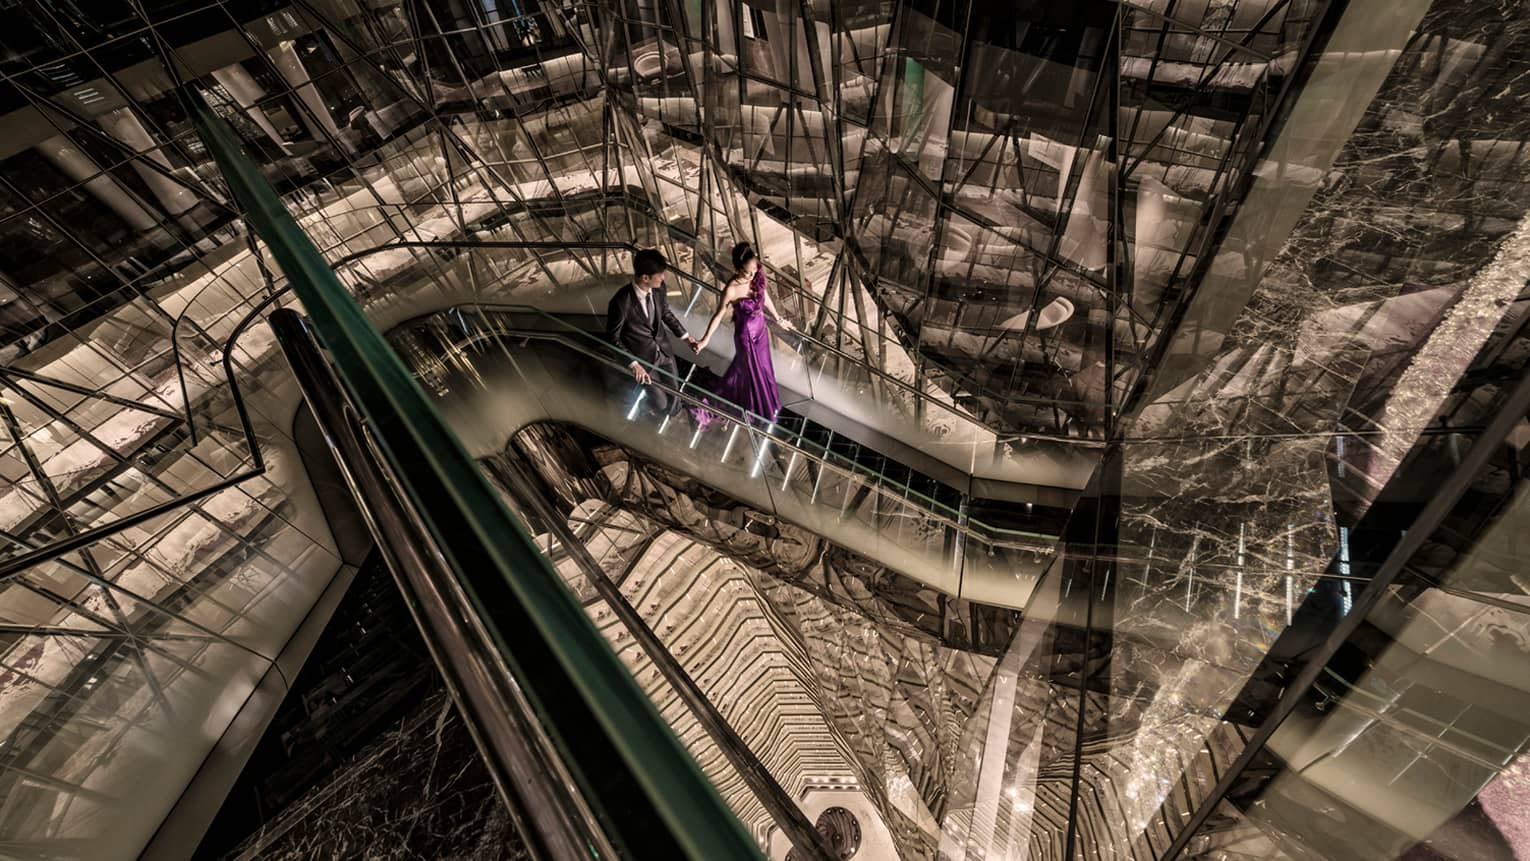 Woman in long purple evening gown and man in suit descend down glass escalator high in tower